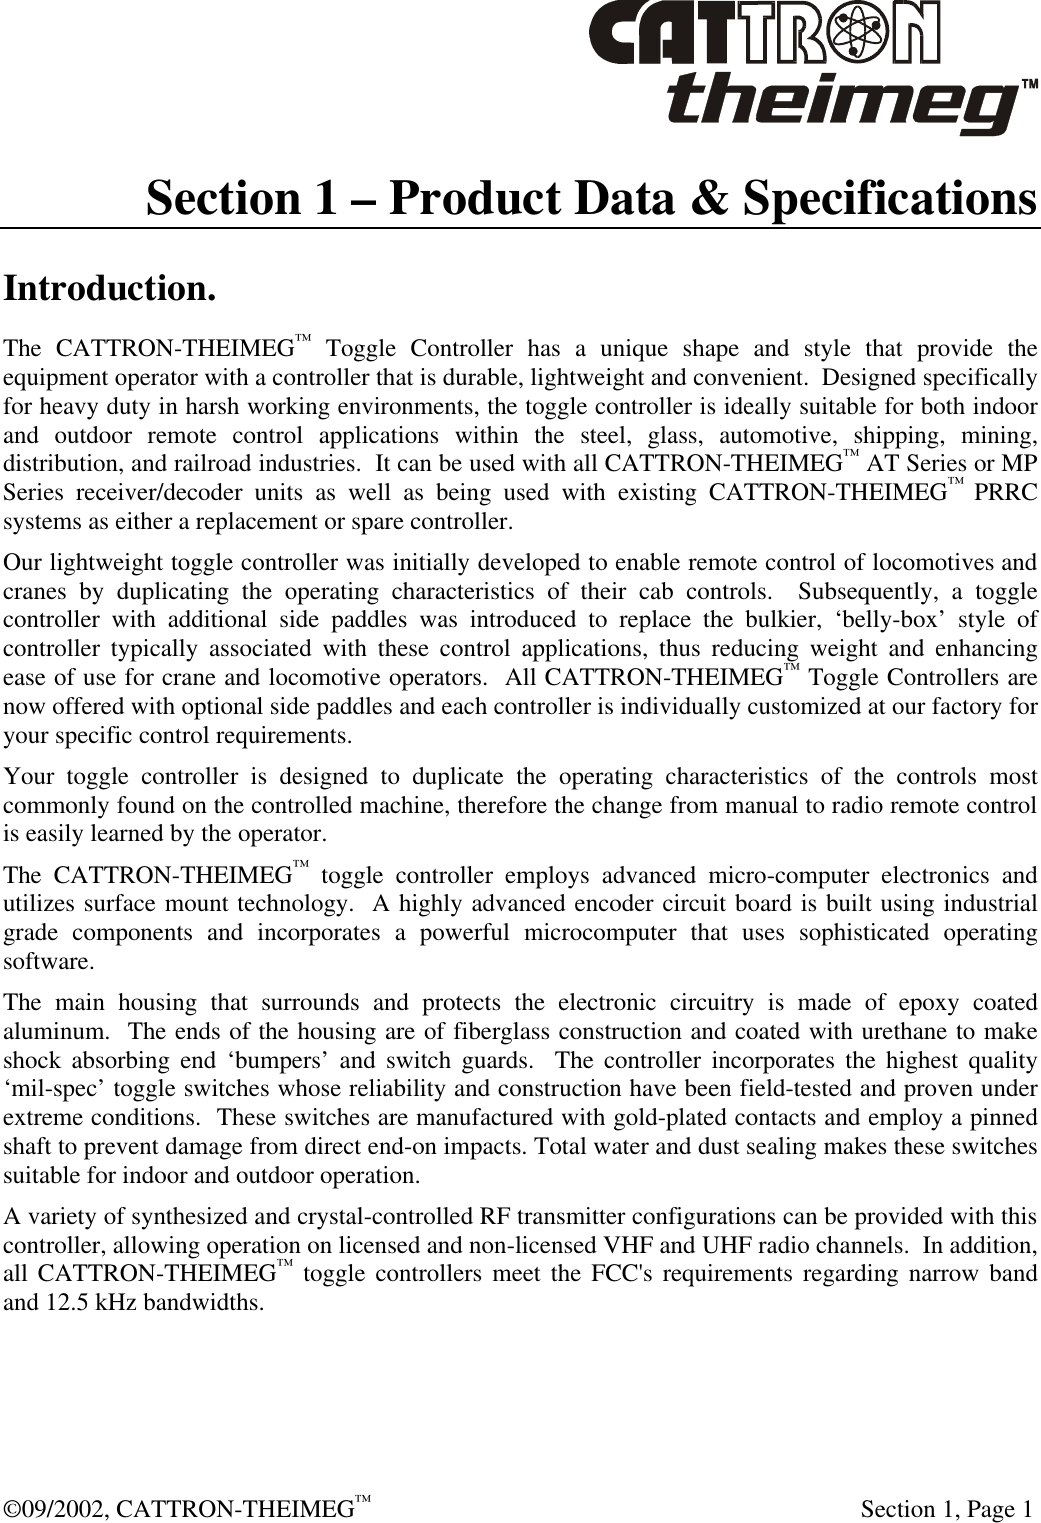  ©09/2002, CATTRON-THEIMEG™   Section 1, Page 1 Section 1 – Product Data &amp; Specifications Introduction. The CATTRON-THEIMEG™ Toggle Controller has a unique shape and style that provide the equipment operator with a controller that is durable, lightweight and convenient.  Designed specifically for heavy duty in harsh working environments, the toggle controller is ideally suitable for both indoor and outdoor remote control applications within the steel, glass, automotive, shipping, mining, distribution, and railroad industries.  It can be used with all CATTRON-THEIMEG™ AT Series or MP Series receiver/decoder units as well as being used with existing CATTRON-THEIMEG™ PRRC systems as either a replacement or spare controller.   Our lightweight toggle controller was initially developed to enable remote control of locomotives and cranes by duplicating the operating characteristics of their cab controls.  Subsequently, a toggle controller with additional side paddles was introduced to replace the bulkier, ‘belly-box’ style of controller typically associated with these control applications, thus reducing weight and enhancing ease of use for crane and locomotive operators.  All CATTRON-THEIMEG™ Toggle Controllers are now offered with optional side paddles and each controller is individually customized at our factory for your specific control requirements. Your toggle controller is designed to duplicate the operating characteristics of the controls most commonly found on the controlled machine, therefore the change from manual to radio remote control is easily learned by the operator.  The CATTRON-THEIMEG™ toggle controller employs advanced micro-computer electronics and utilizes surface mount technology.  A highly advanced encoder circuit board is built using industrial grade components and incorporates a powerful microcomputer that uses sophisticated operating software.  The main housing that surrounds and protects the electronic circuitry is made of epoxy coated aluminum.  The ends of the housing are of fiberglass construction and coated with urethane to make shock absorbing end ‘bumpers’ and switch guards.  The controller incorporates the highest quality ‘mil-spec’ toggle switches whose reliability and construction have been field-tested and proven under extreme conditions.  These switches are manufactured with gold-plated contacts and employ a pinned shaft to prevent damage from direct end-on impacts. Total water and dust sealing makes these switches suitable for indoor and outdoor operation. A variety of synthesized and crystal-controlled RF transmitter configurations can be provided with this controller, allowing operation on licensed and non-licensed VHF and UHF radio channels.  In addition, all CATTRON-THEIMEG™ toggle controllers meet the FCC&apos;s requirements regarding narrow band and 12.5 kHz bandwidths. 